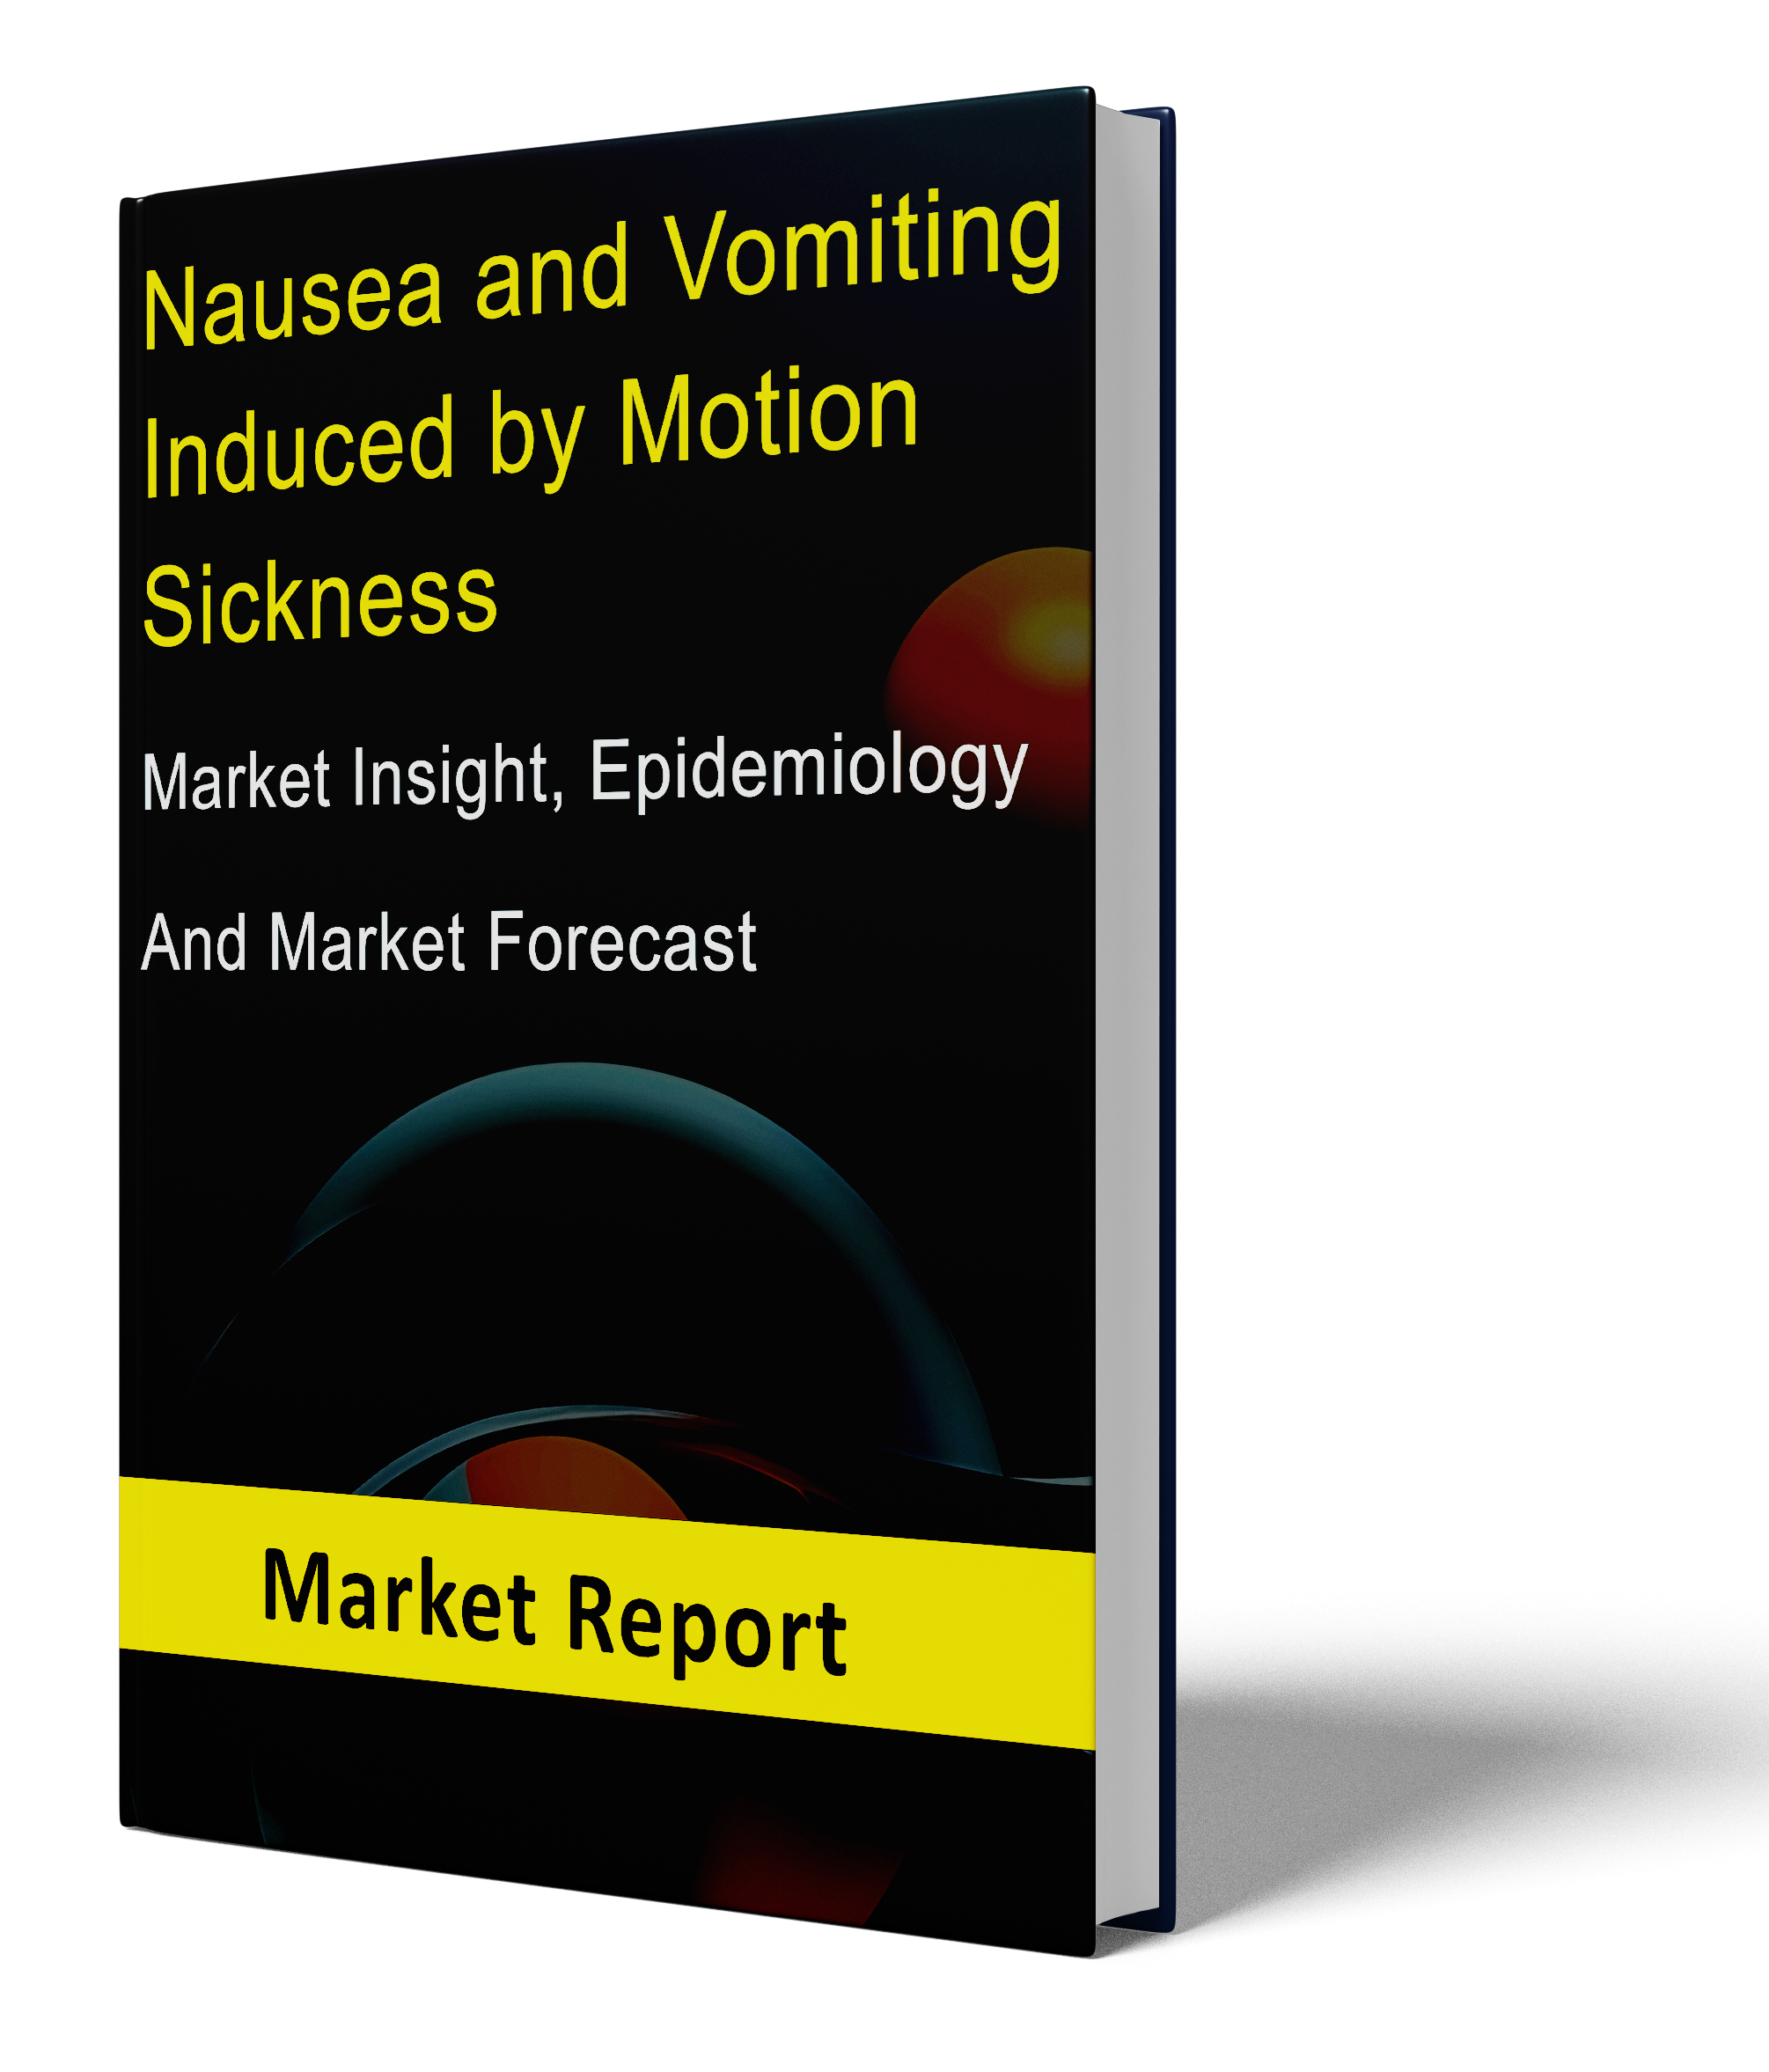 Nausea and Vomiting Induced by Motion Sickness Market Report